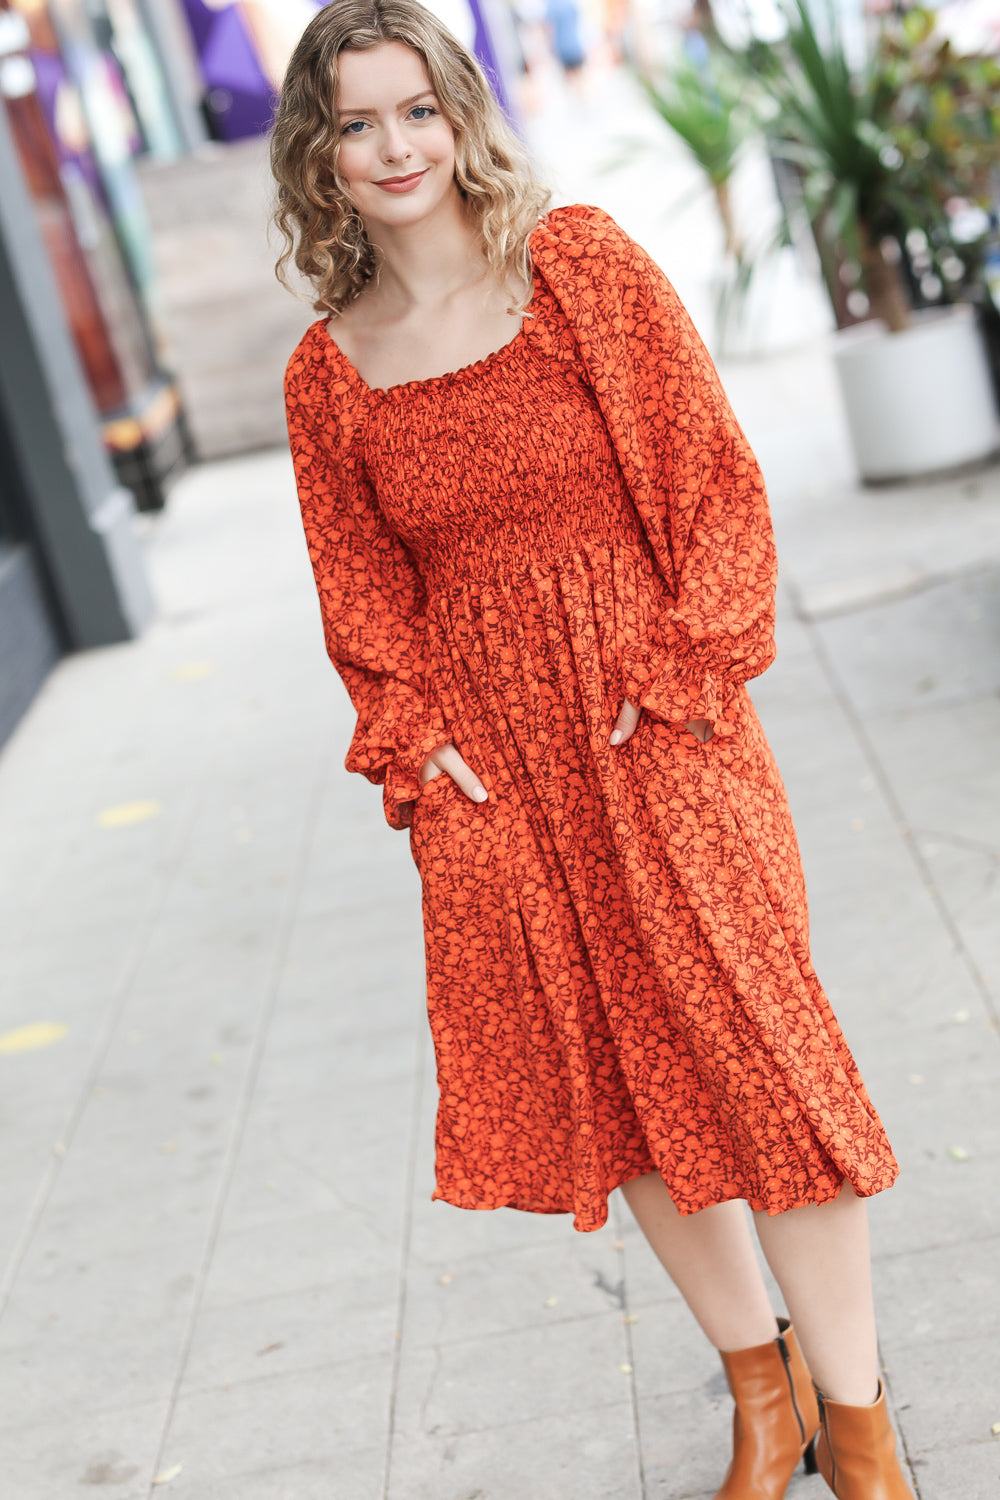 Keep You Close Ditsy Floral Woven Dress • Rust